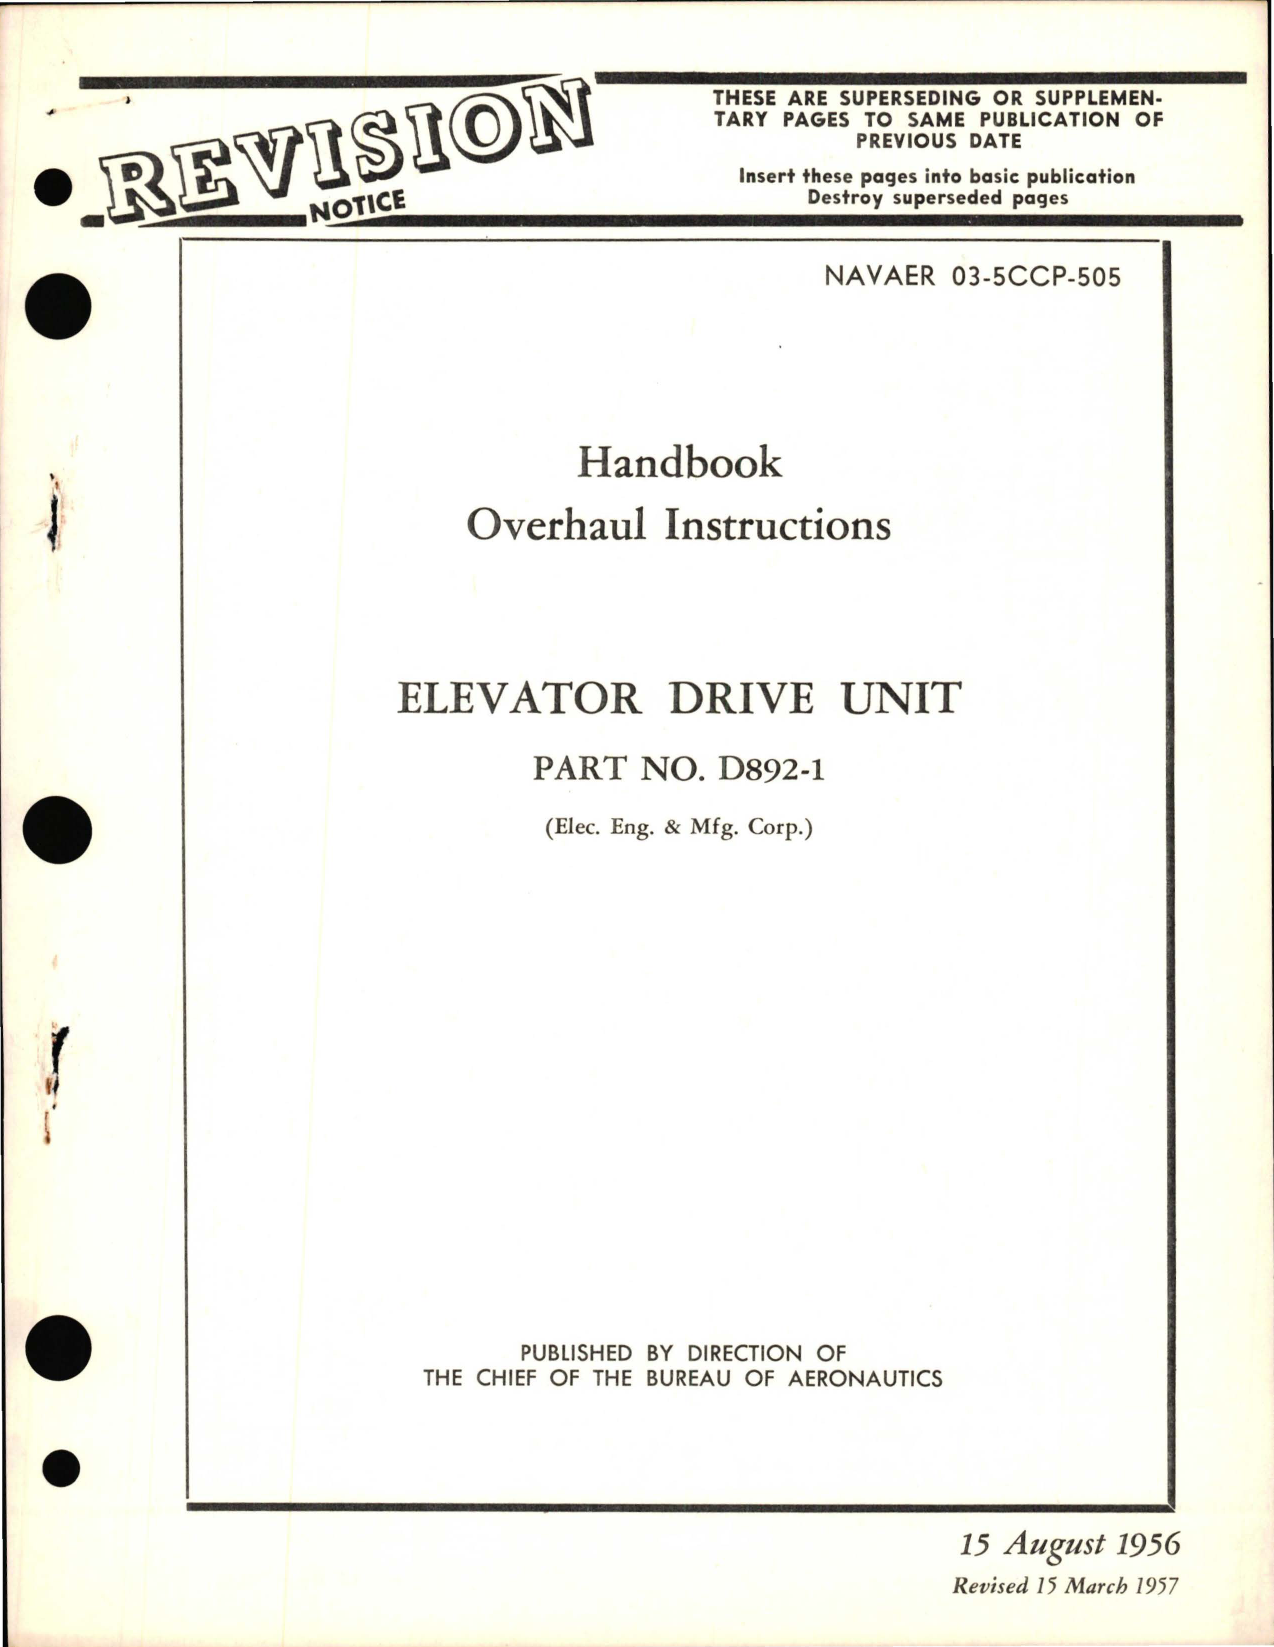 Sample page 1 from AirCorps Library document: Overhaul Instructions for Elevator Drive Unit - Part D892-1 